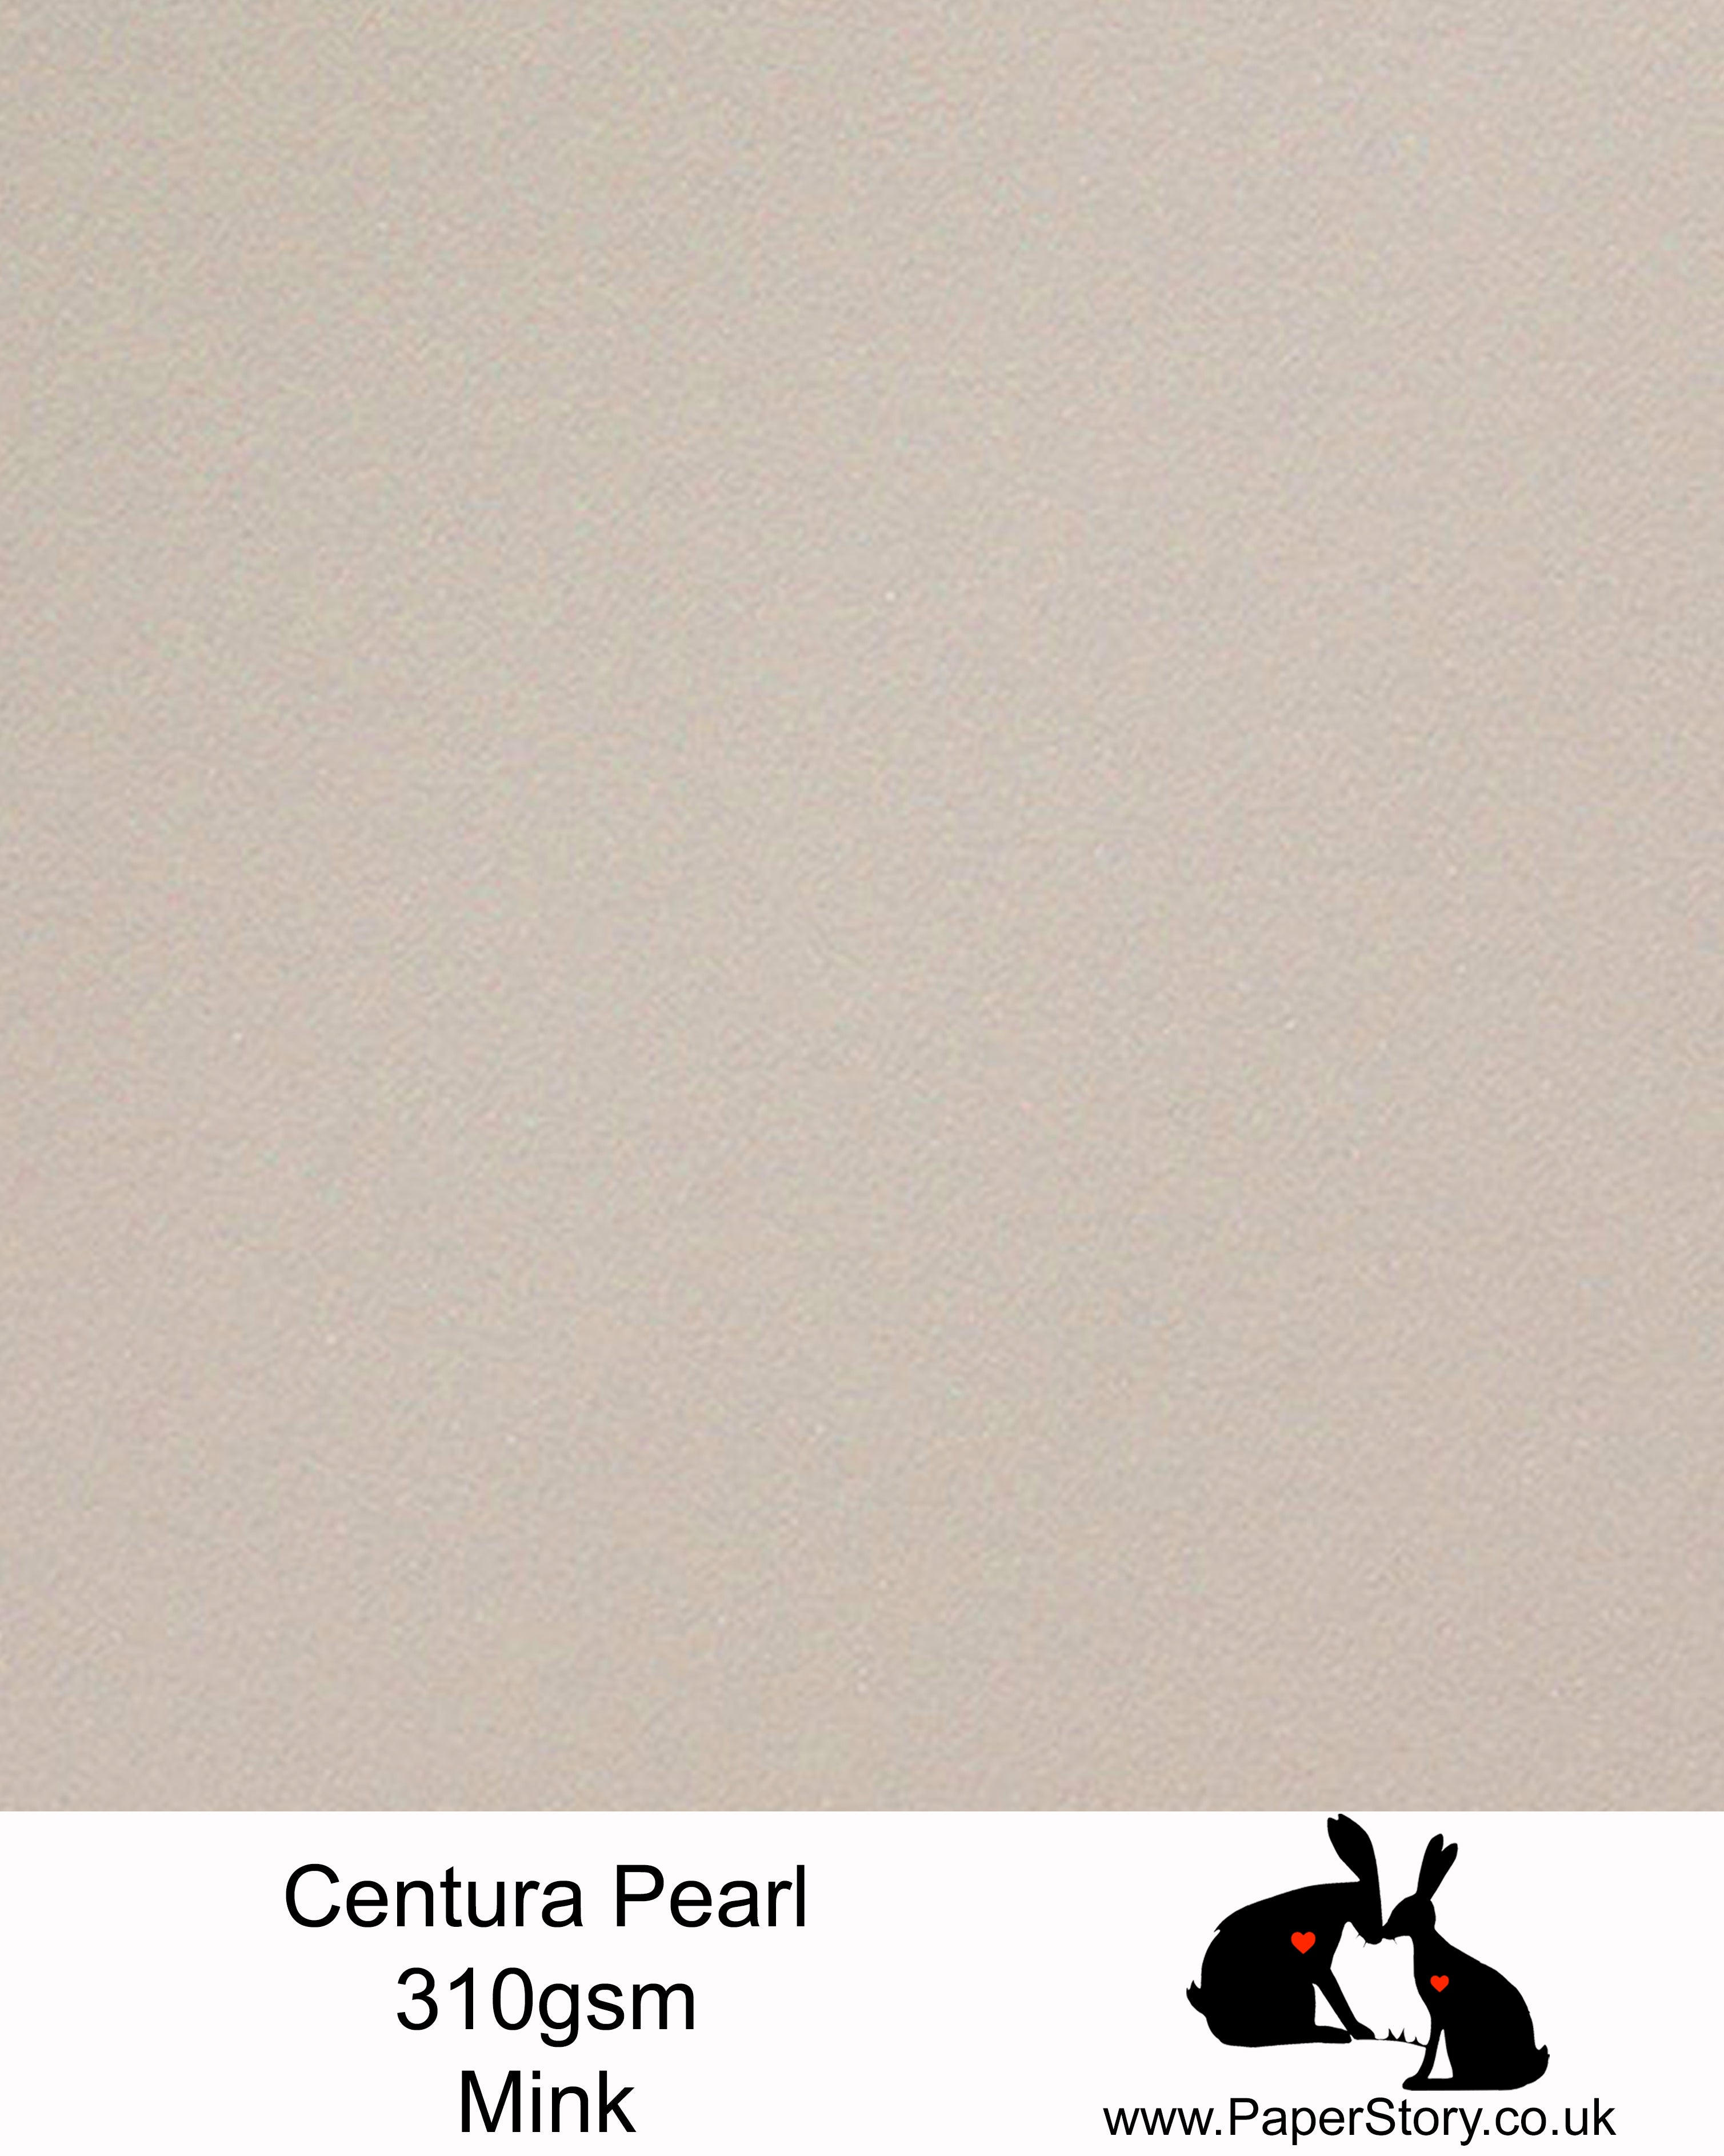 Centura Pearl single sided card 310 gsm. Pearlescent one side, white printable surface on the other. High-quality Pearlescent card made in the UK, perfect for wedding cards, greetings cards, boxes and art and craft projects.